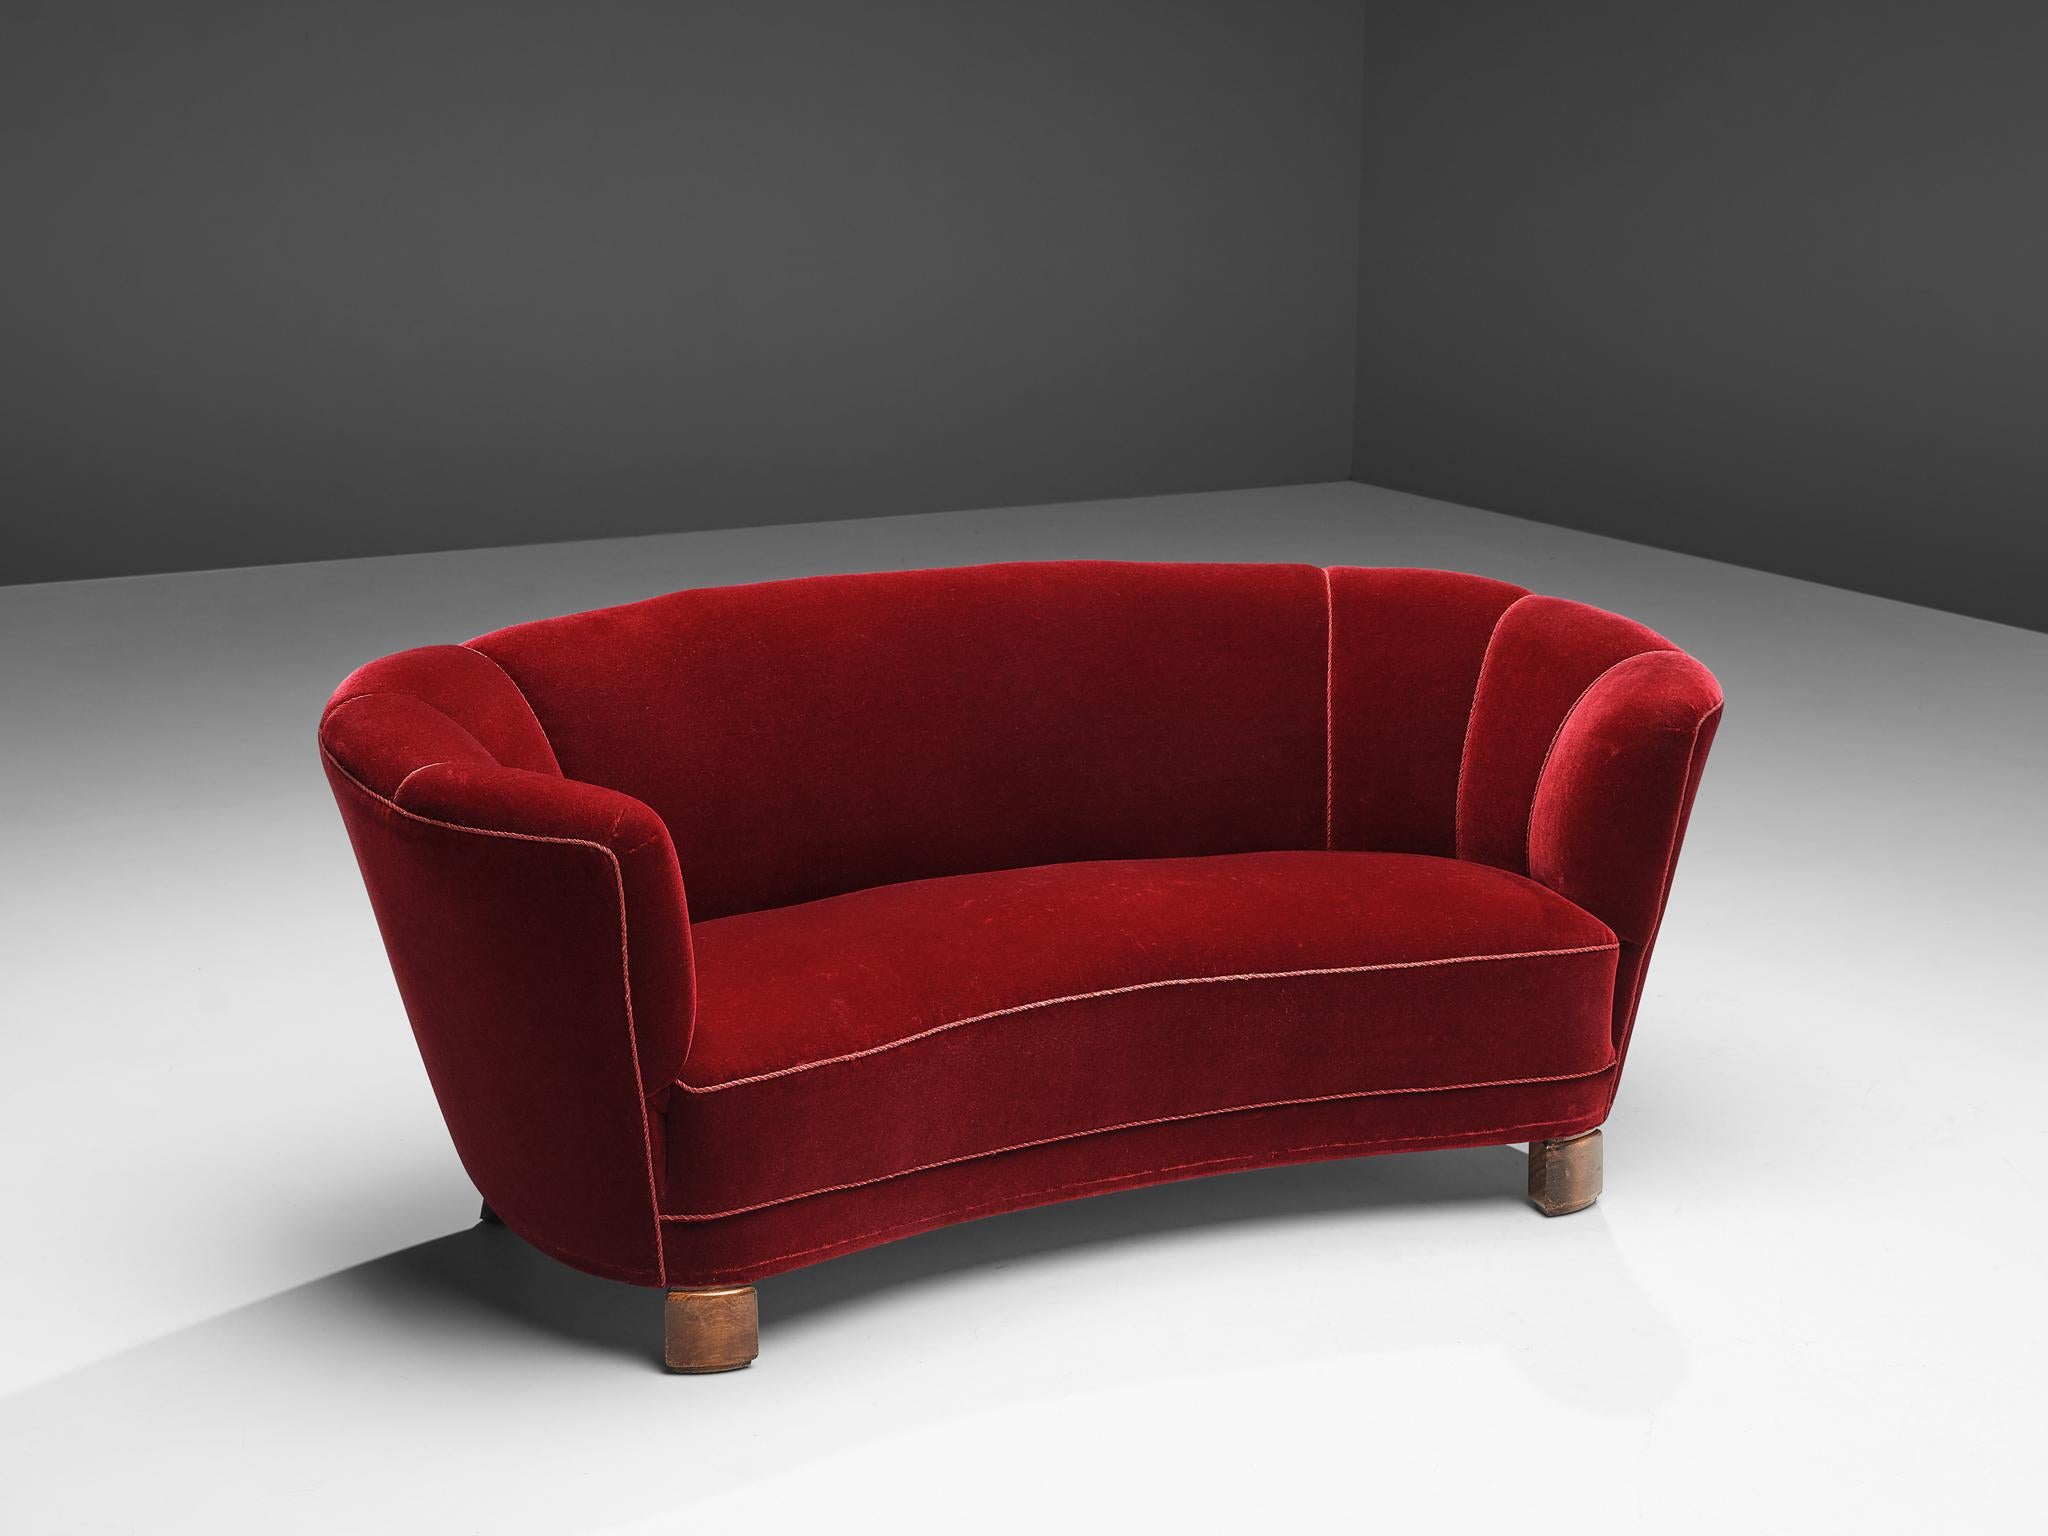 ‘Banana’ sofa, burgundy upholstery, wood, Denmark, 1940s

This voluptuous sofa is executed with a burgundy velvet upholstery. The sofa has a high lined and curved back that flows over into the bulky armrests. The sofa is slightly curved and offers a